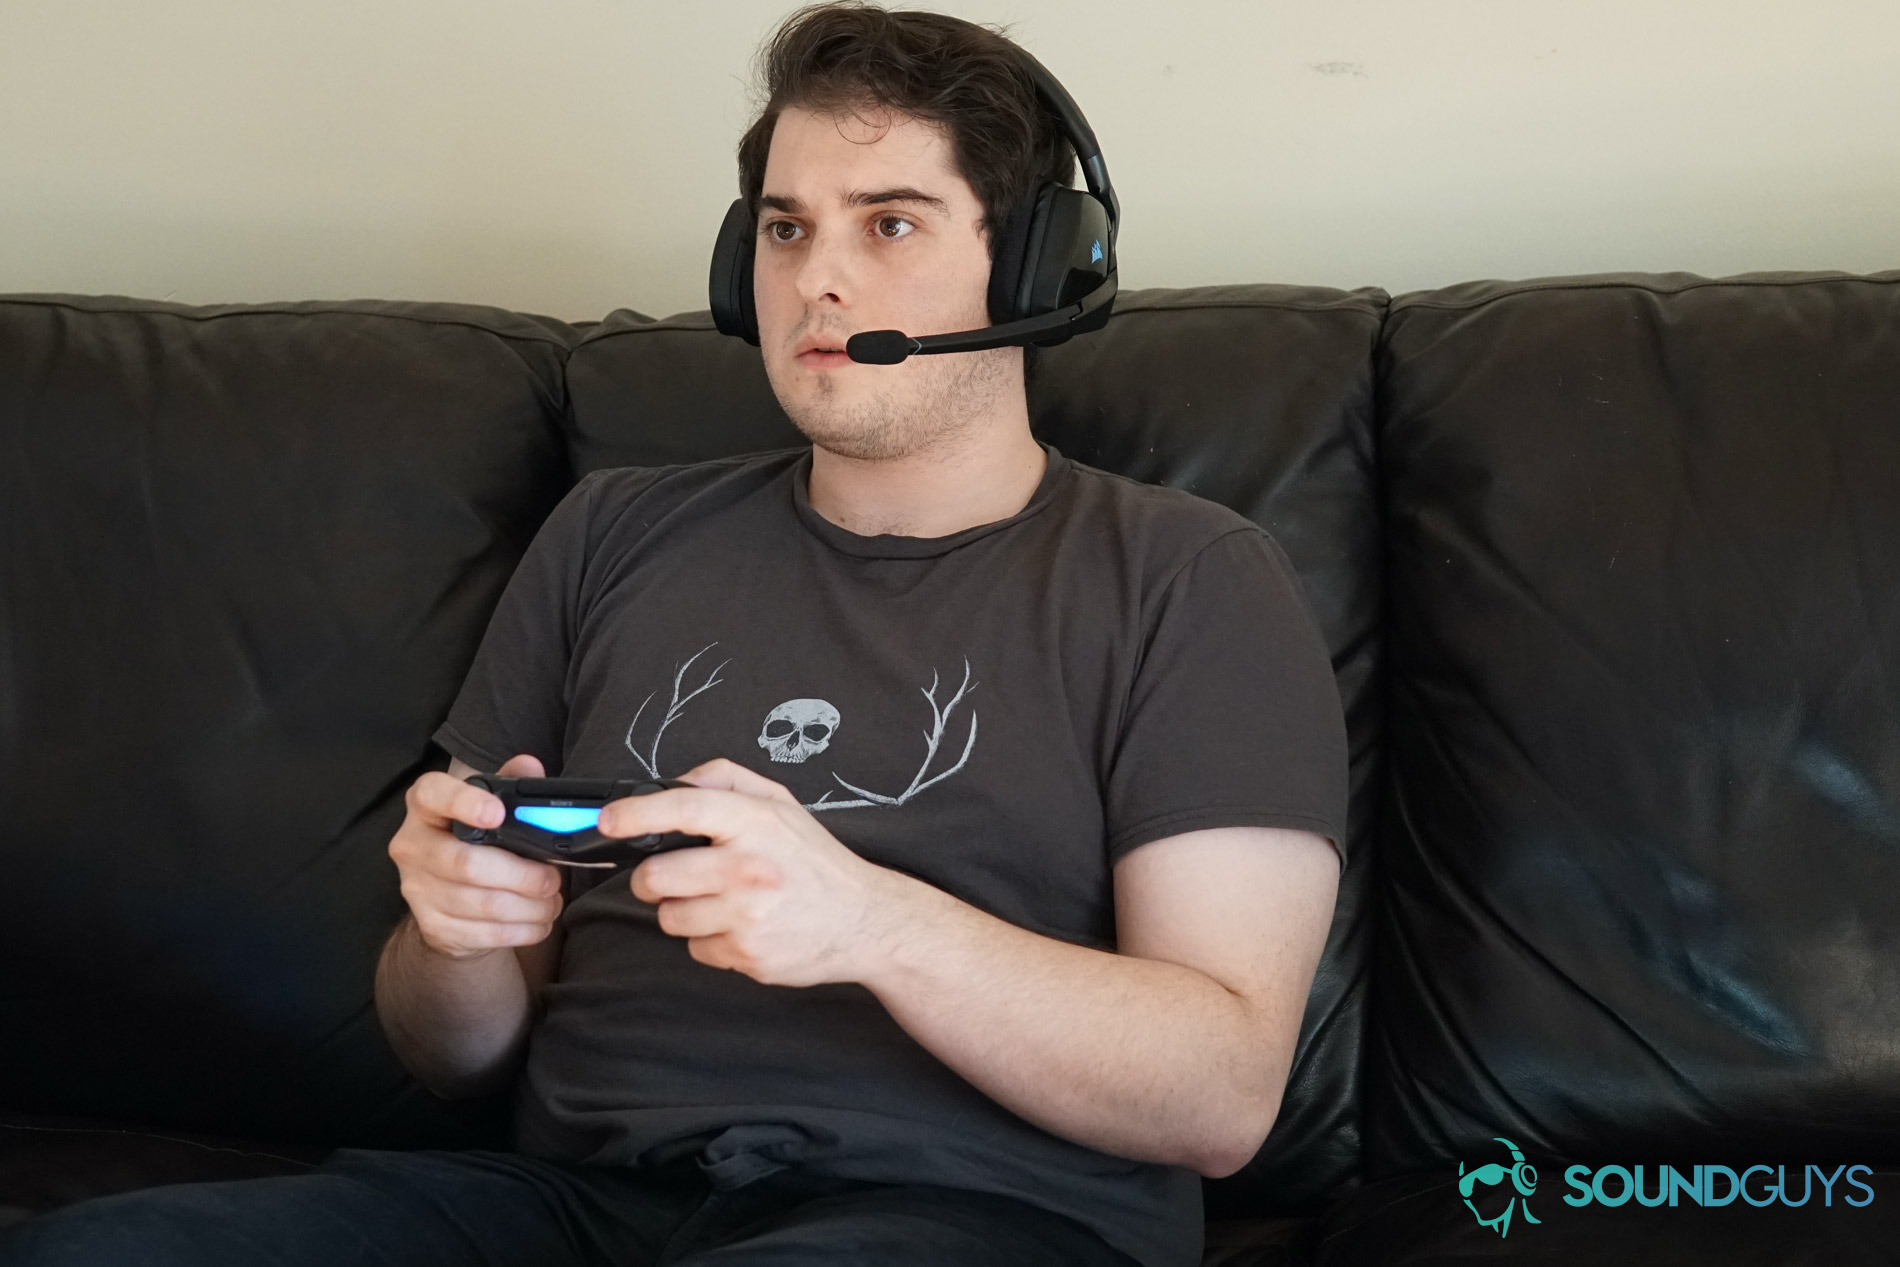 A man seated on a couch using the Corsair Void RGB Elite Wireless gaming headset while playing Dauntless on Playstation 4.